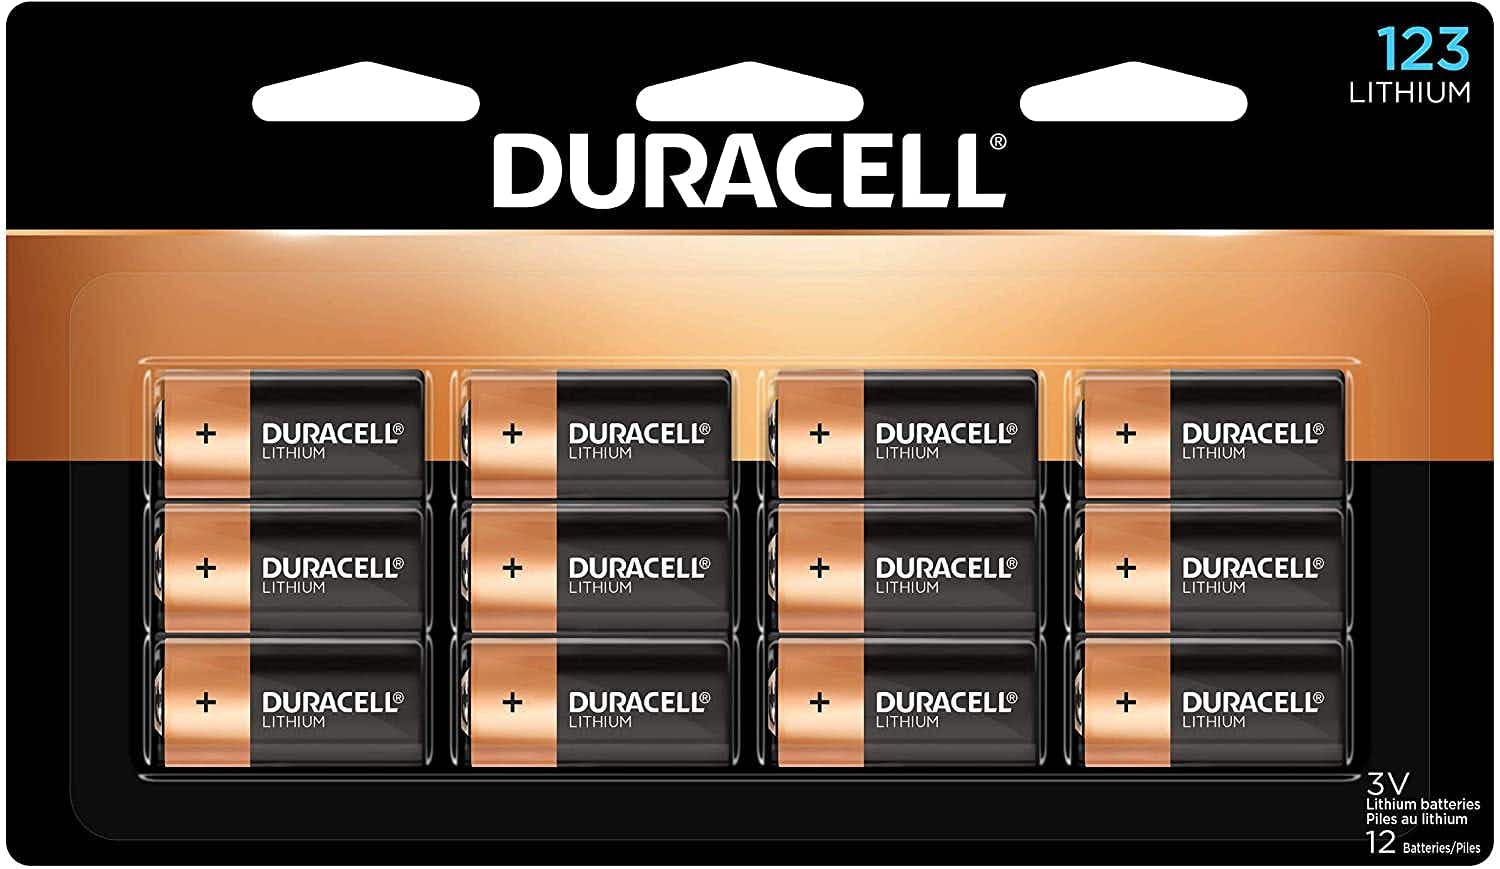 A 12 pack of Duracell lithium batteries